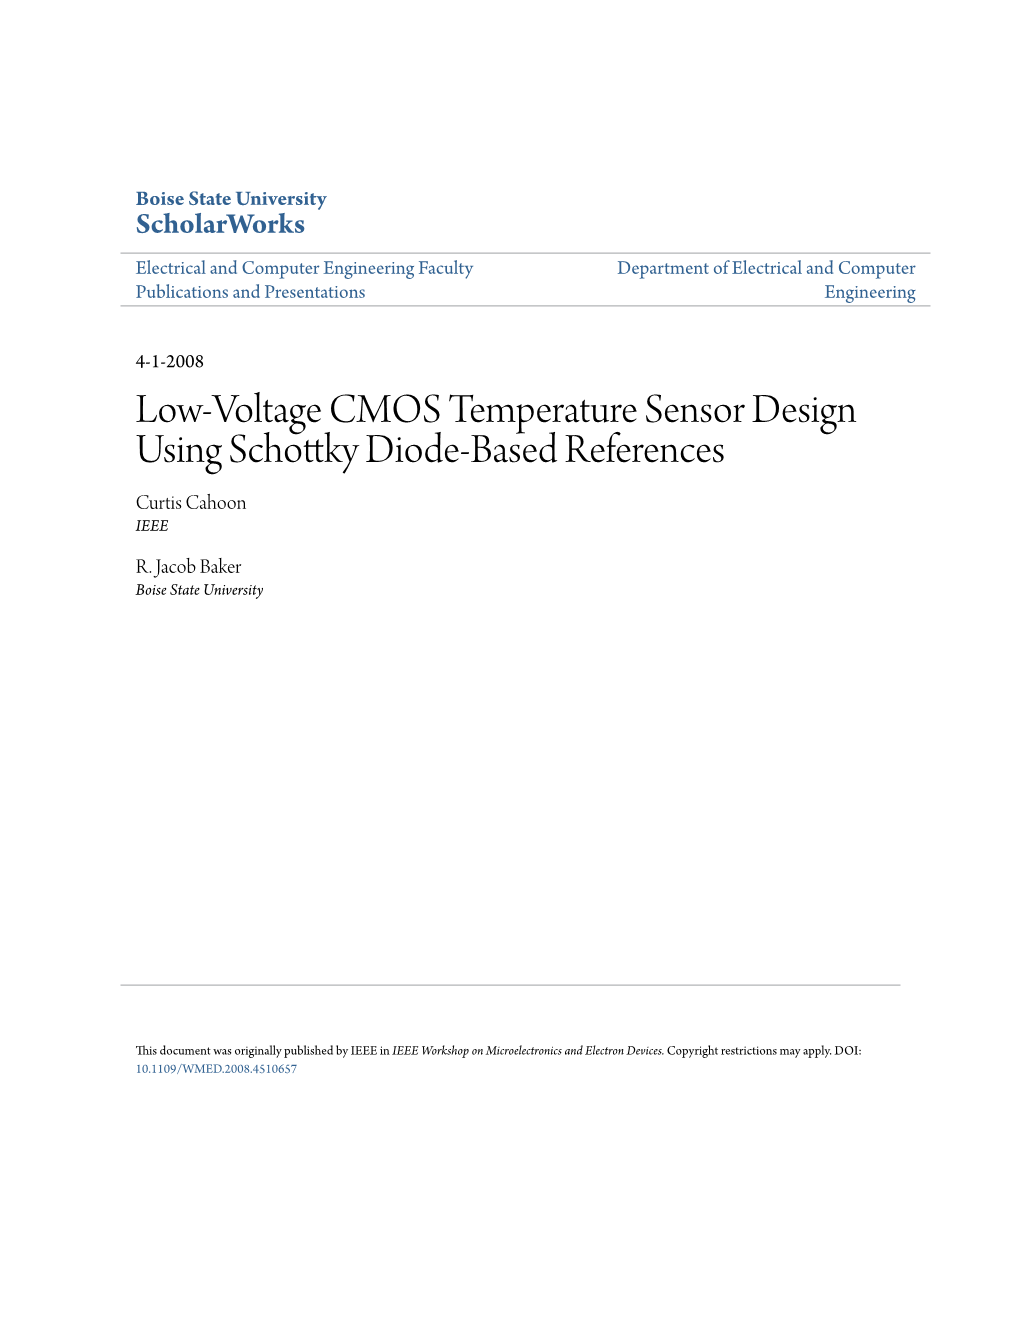 Low-Voltage CMOS Temperature Sensor Design Using Schottky Diode-Based References Curtis Cahoon IEEE